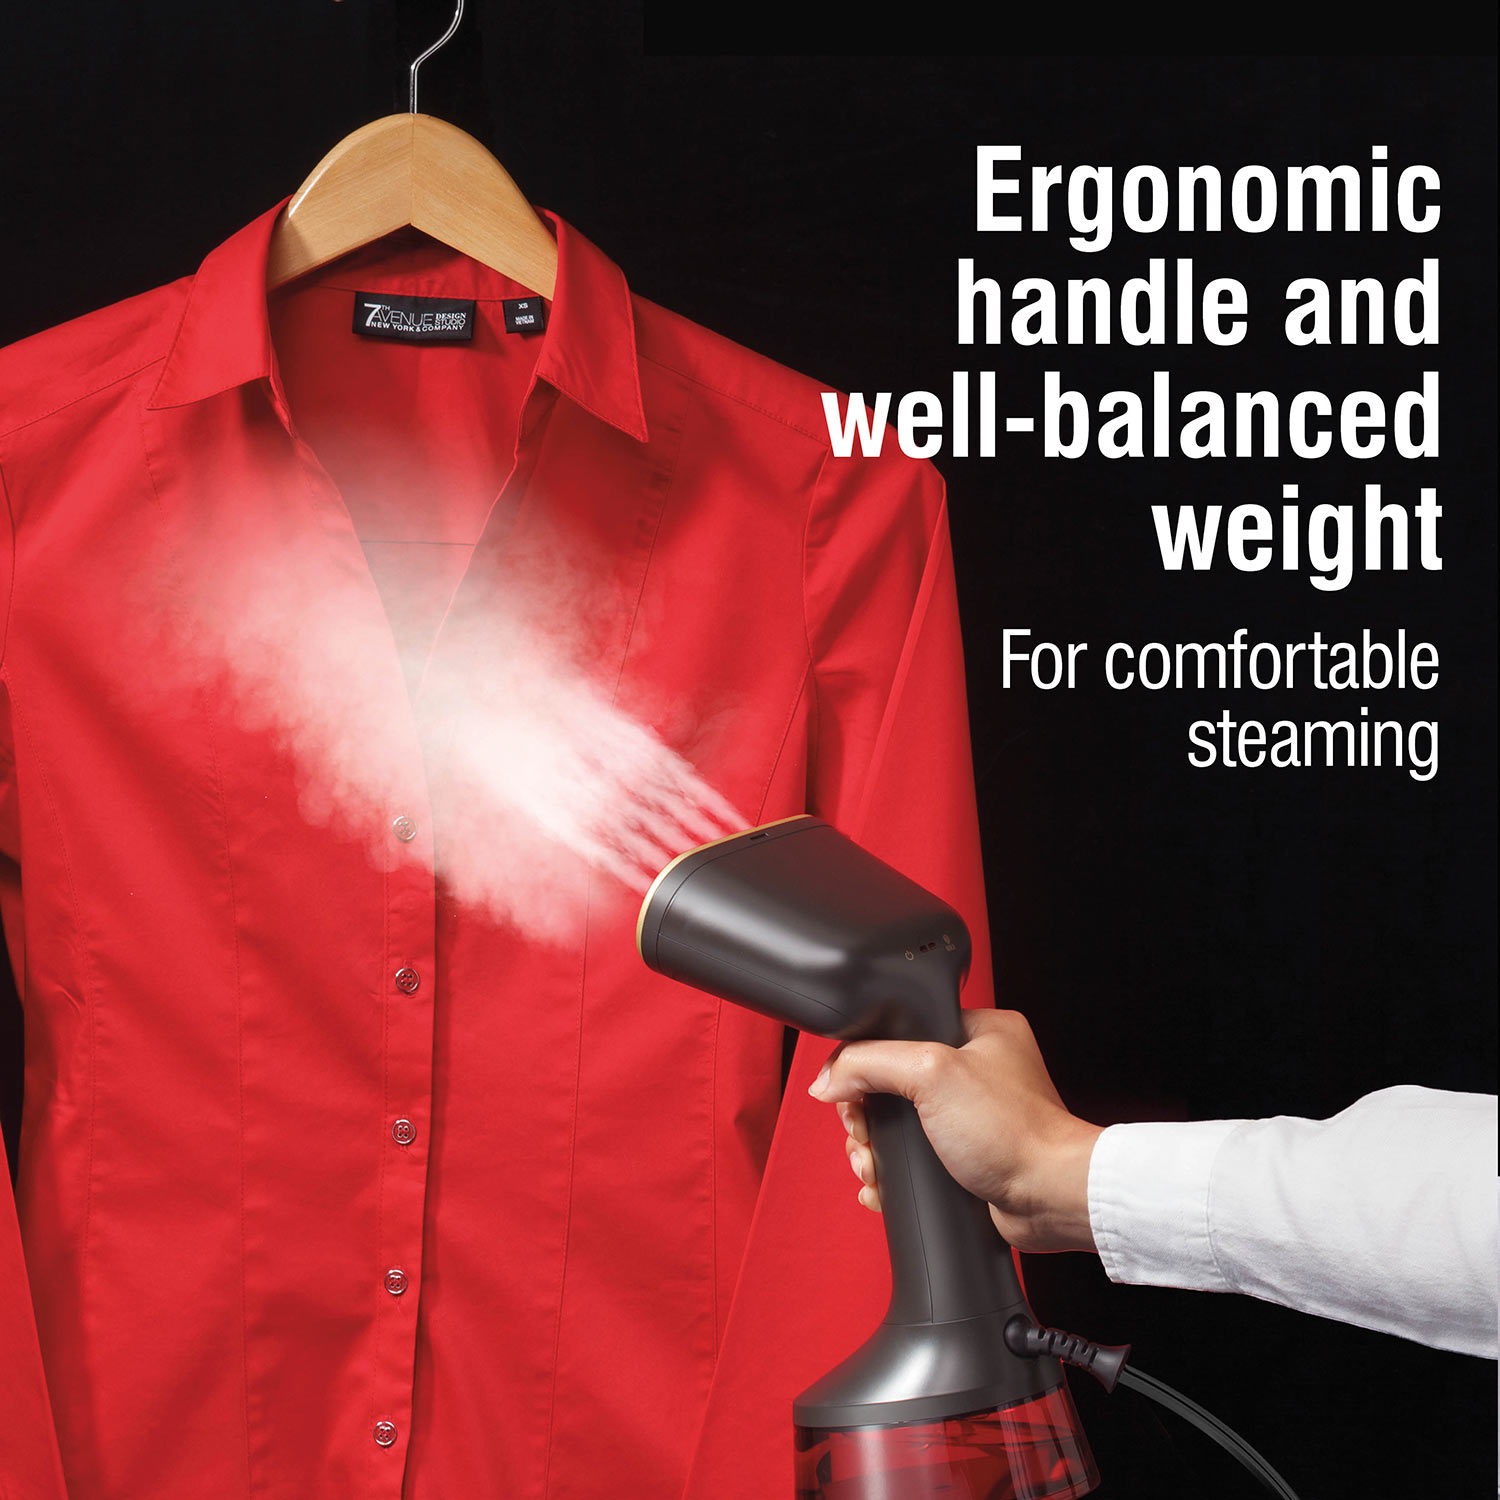 Ergonomic handle and well-balanced weight for comfortable steaming